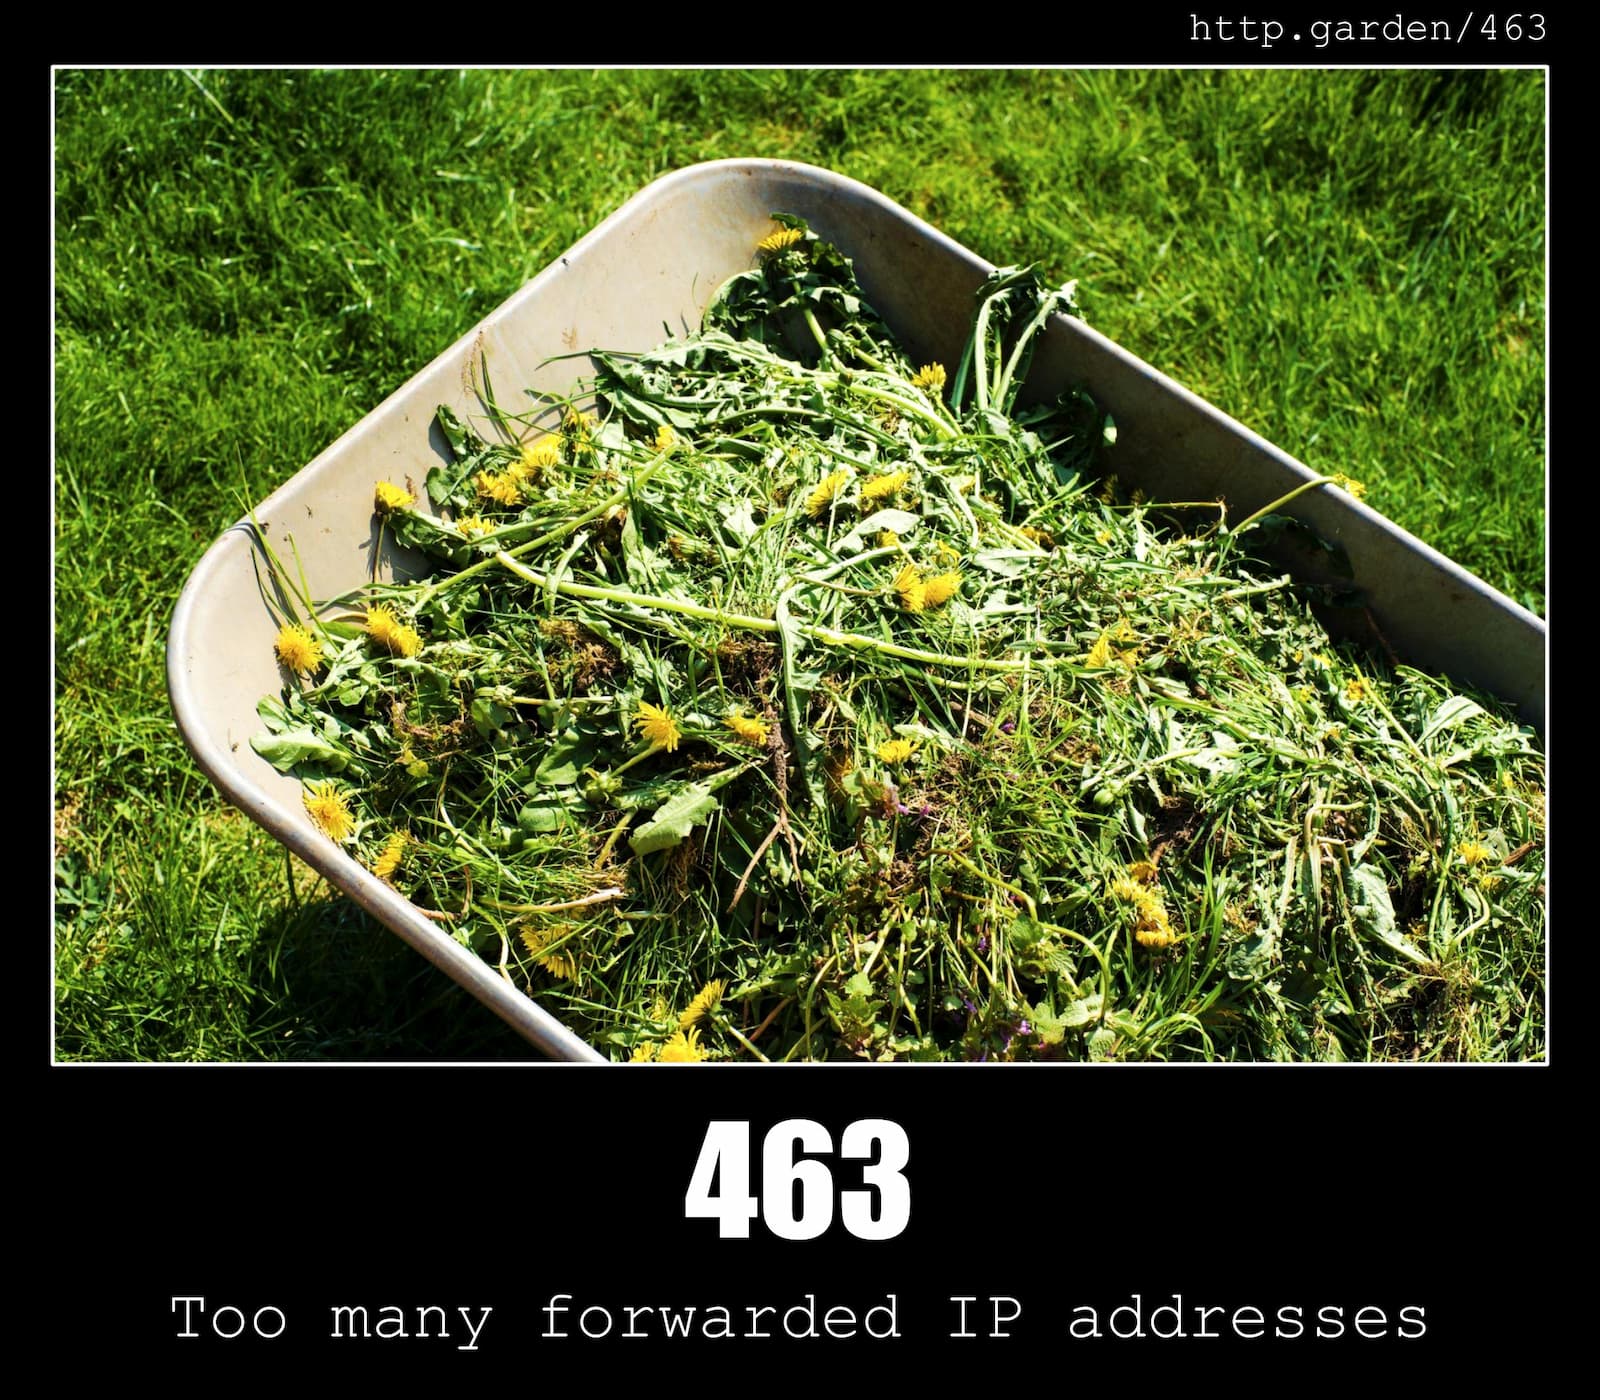 HTTP Status Code 463 Too many forwarded IP addresses